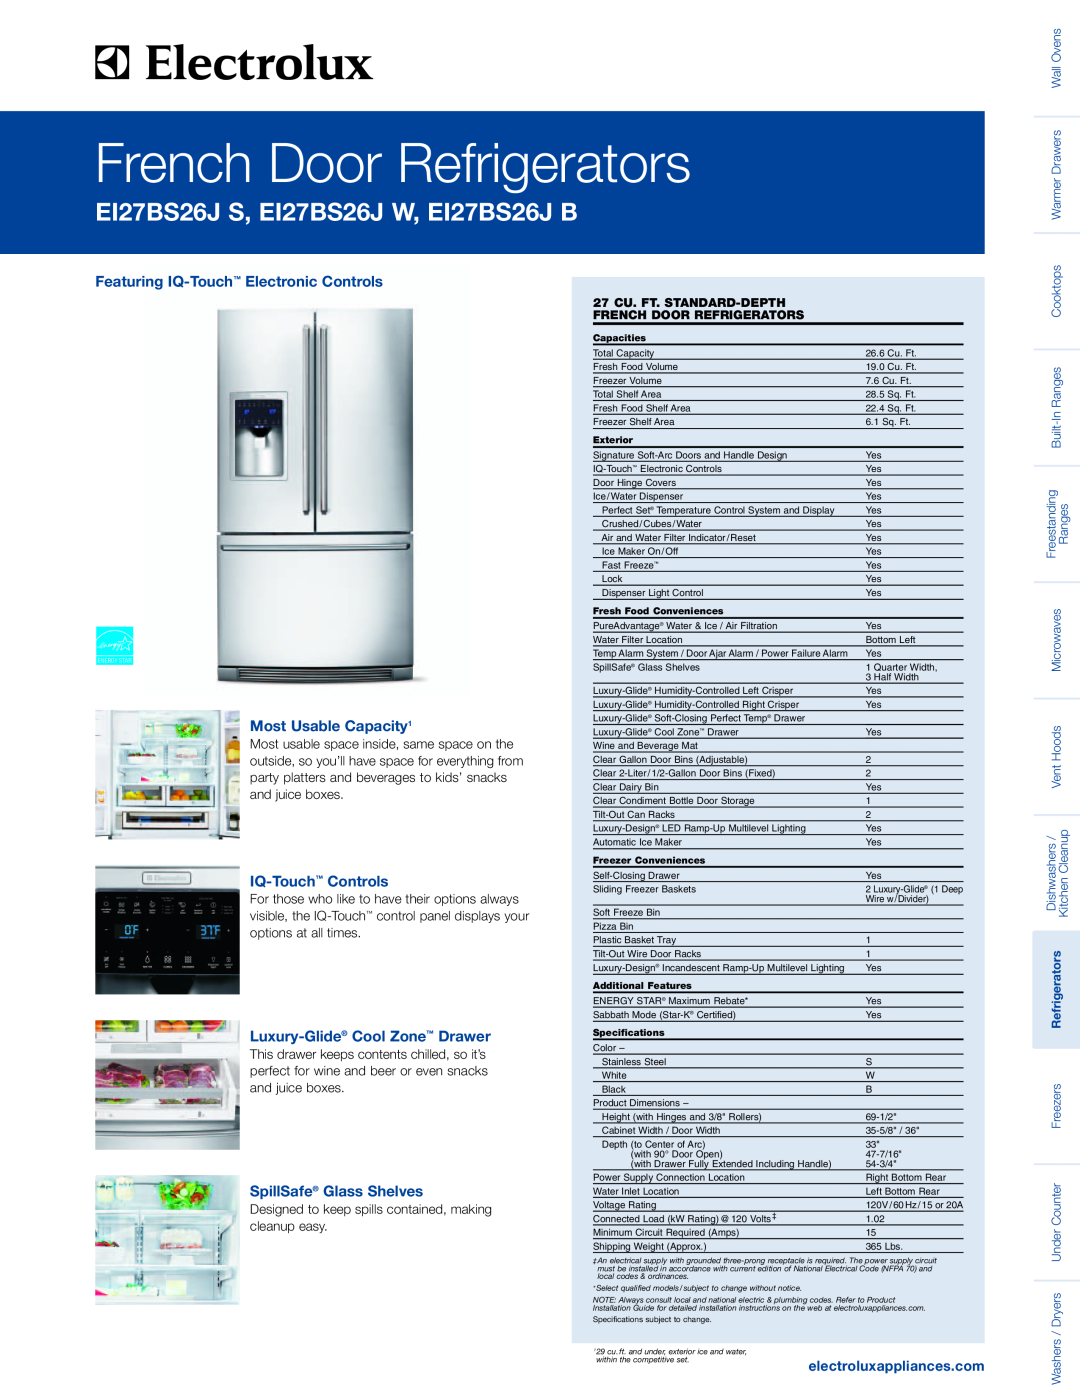 Electrolux EI27BS26J S specifications Featuring IQ-Touch Electronic Controls Most Usable Capacity1, IQ-Touch Controls 